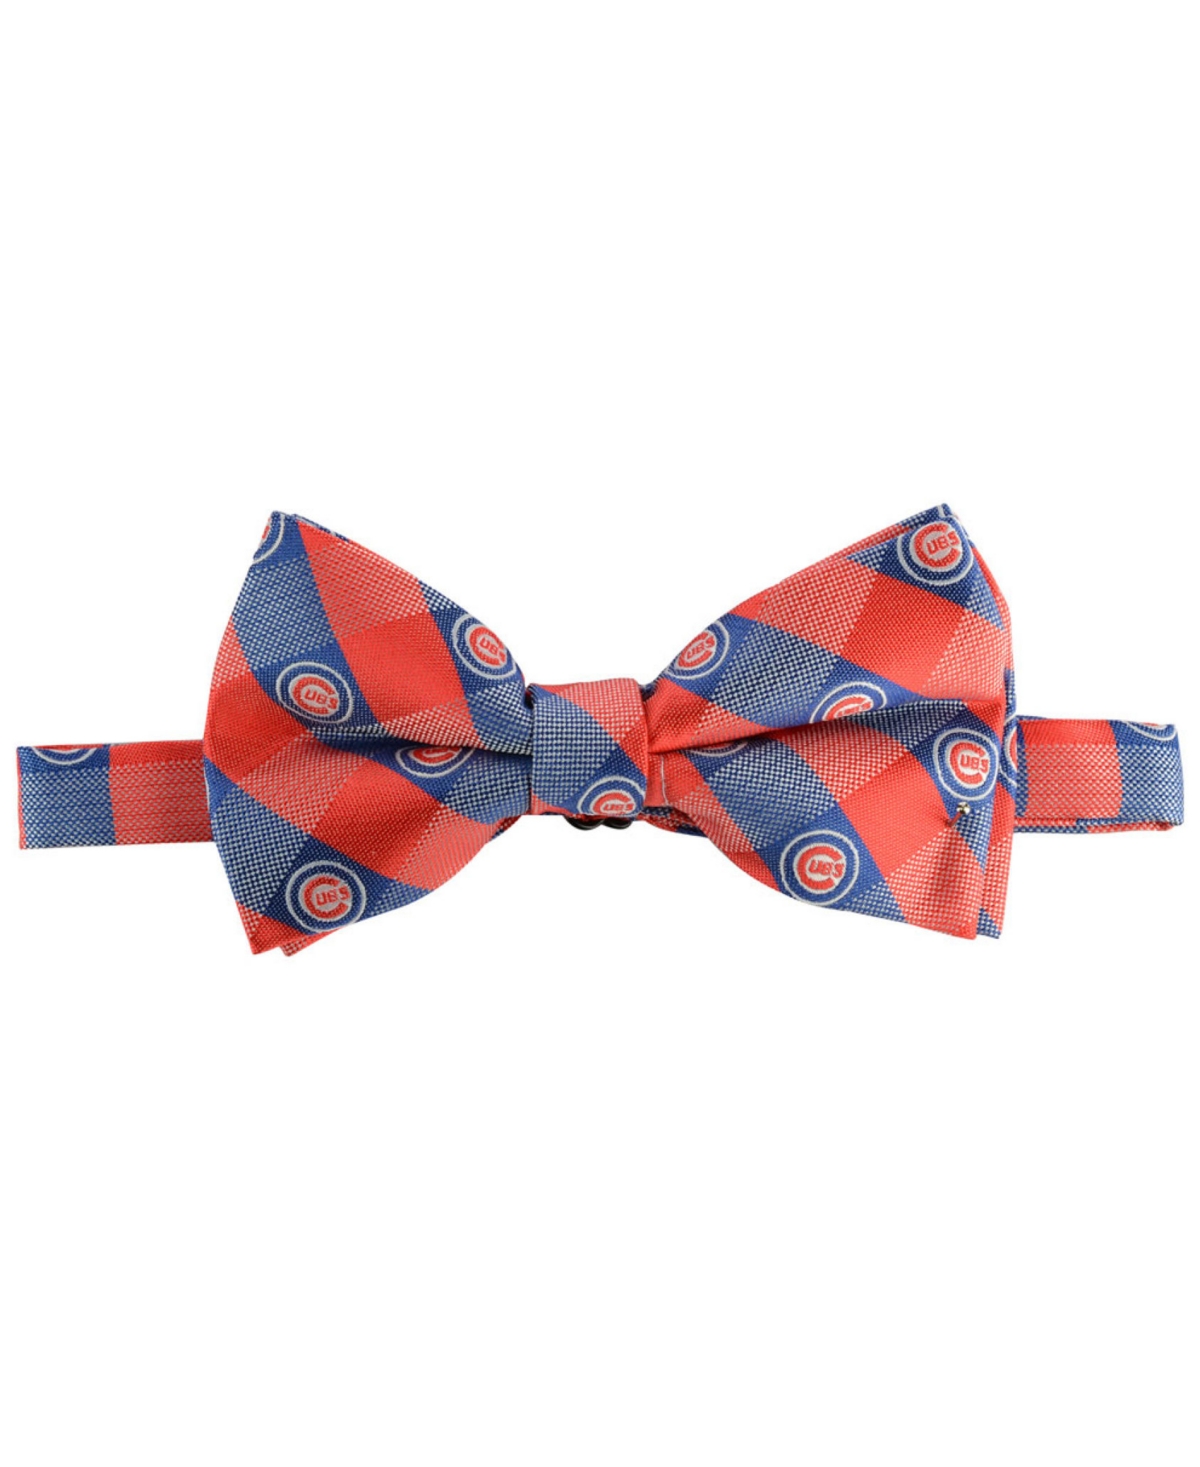 Chicago Cubs Bow Tie - Blue